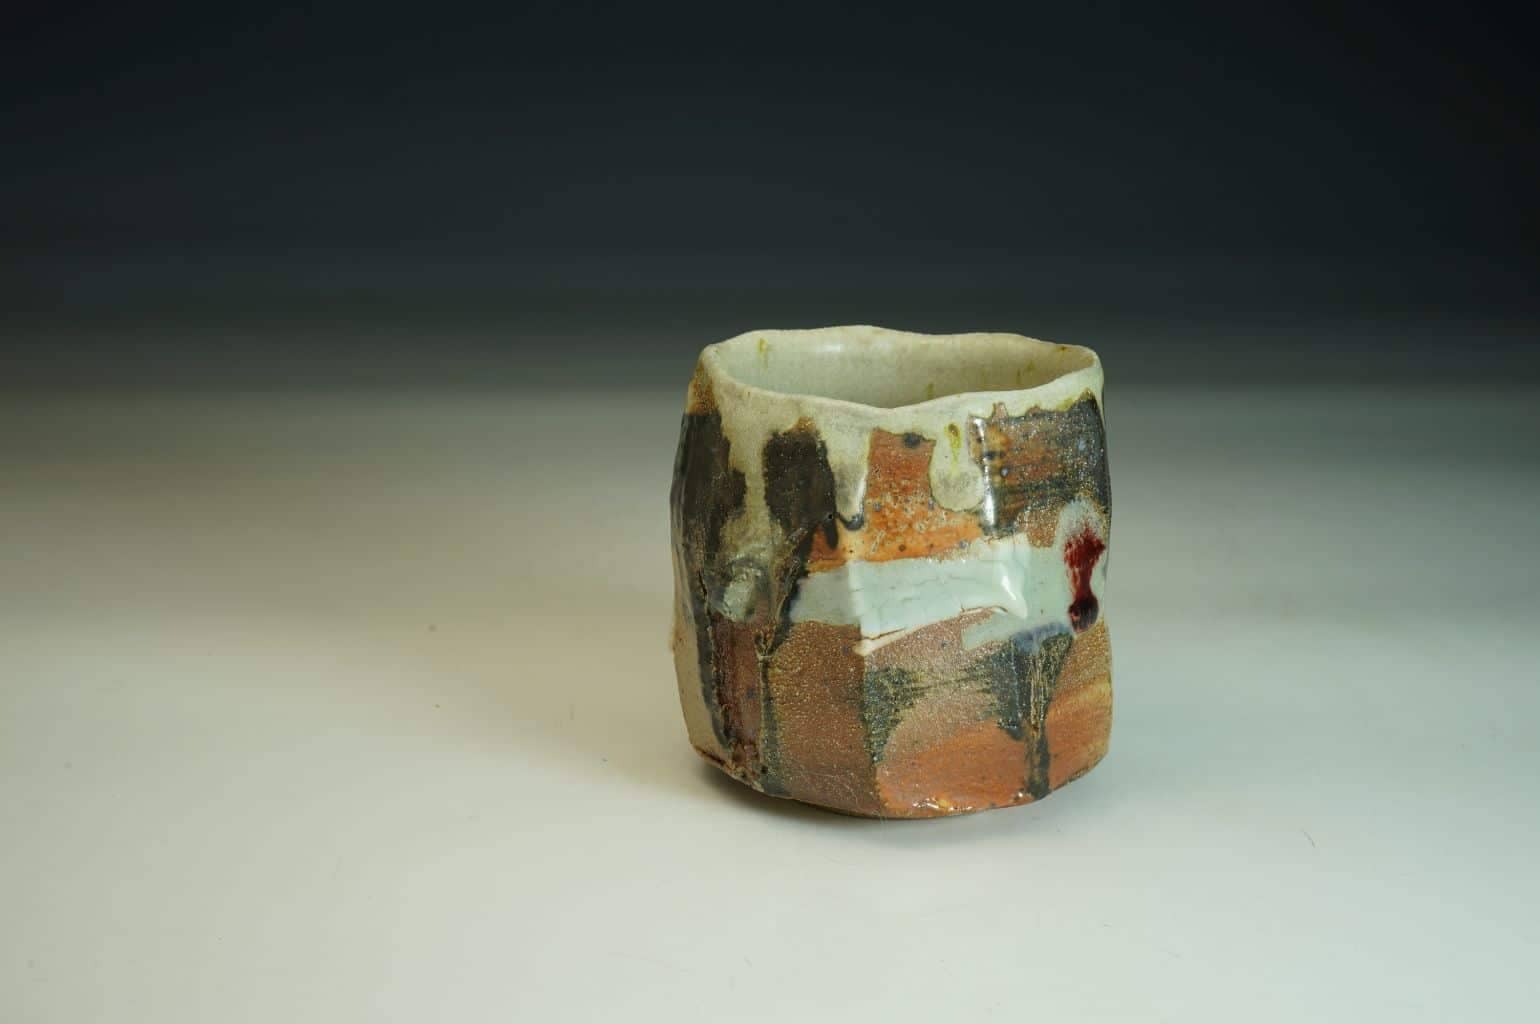 Beautiful wood-fired Chawan tea bowl in stoneware. An interesting out surface wood-fired with soda flashing.